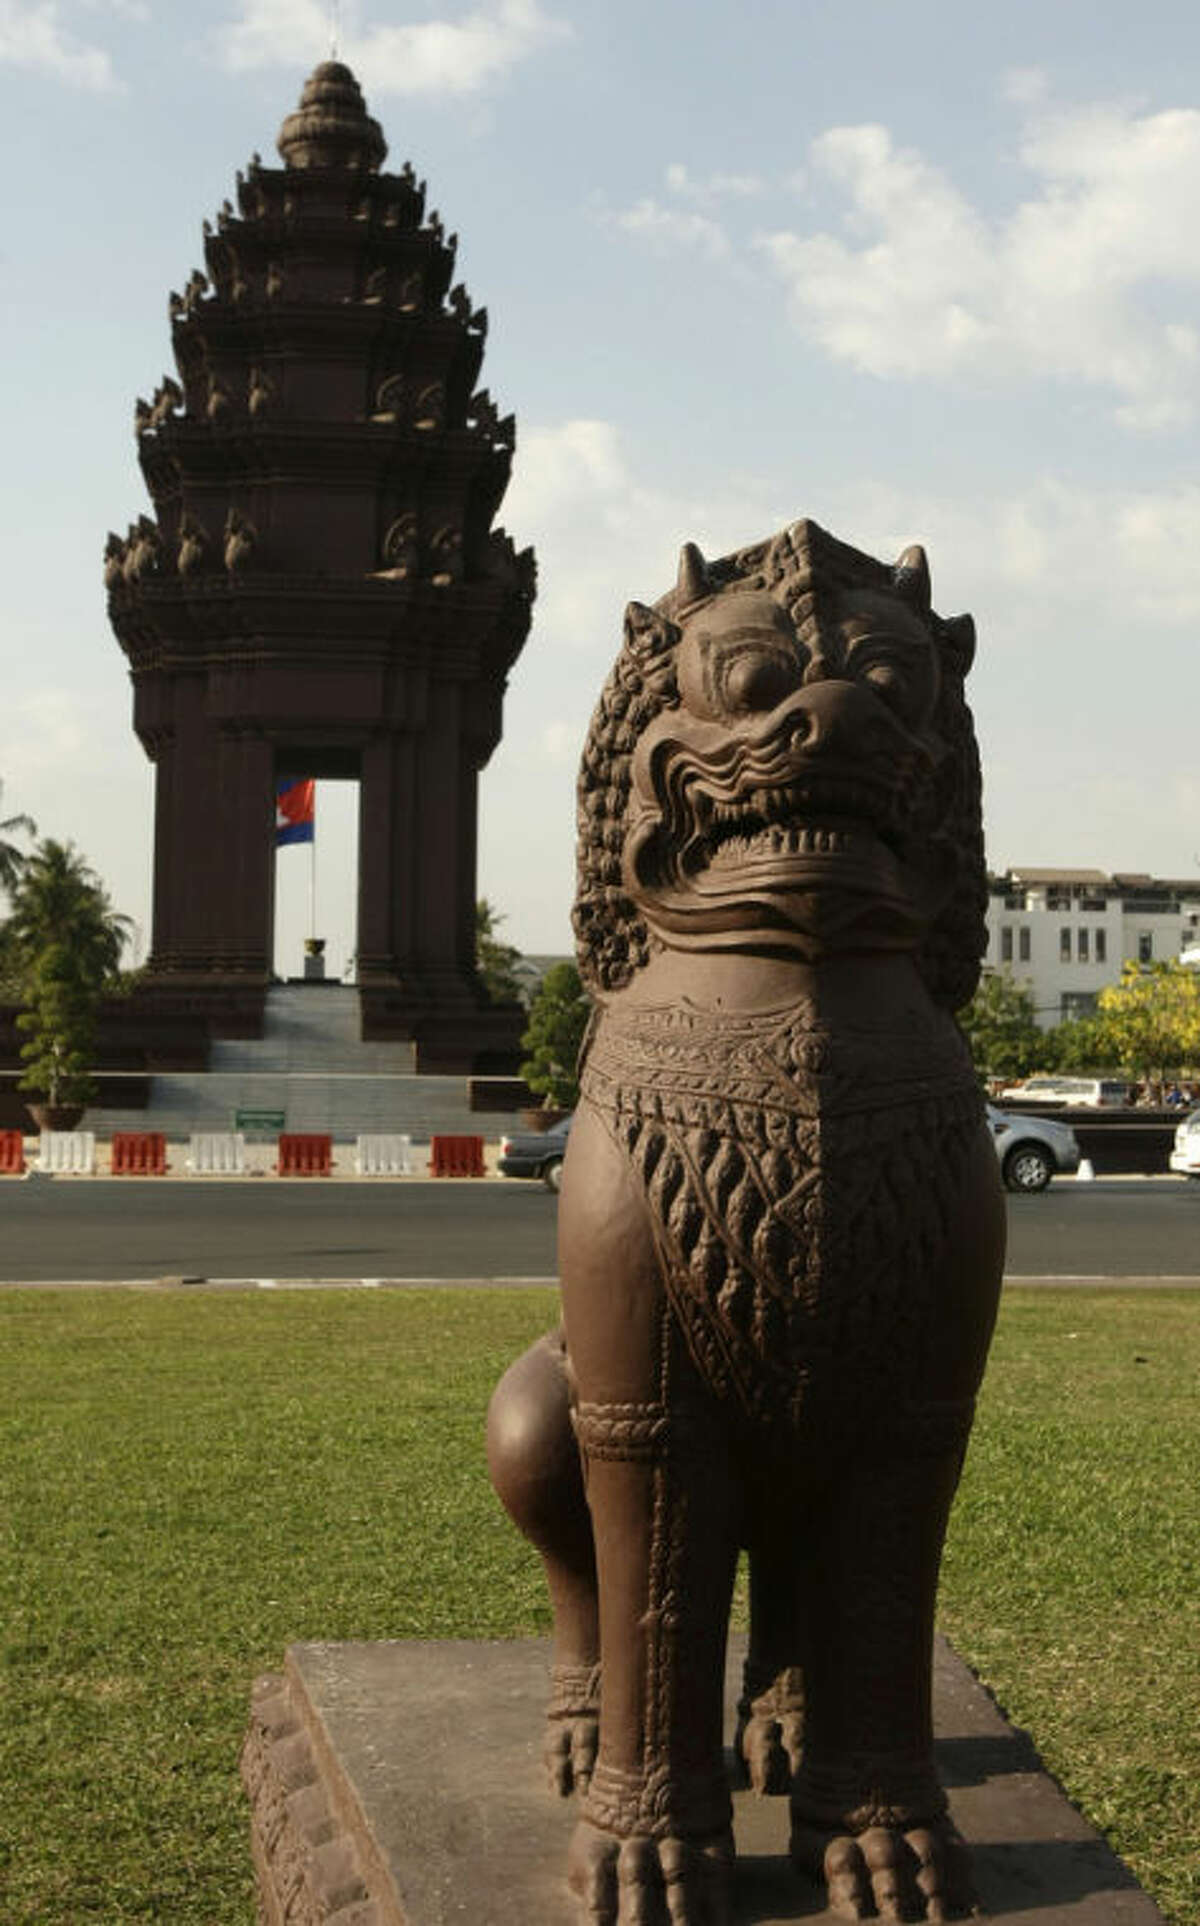 In this photo taken, Feb. 25, 2013, a lion statue sits beside the Independence Monument, in Phnom Penh, Cambodia. The Independence Monument is a striking shade of terra cotta by day and brightly illuminated by night. Glowing or not, it was constructed in 1958 to commemorate independence from the French that had been achieved five years prior. (AP Photo/Heng Sinith)